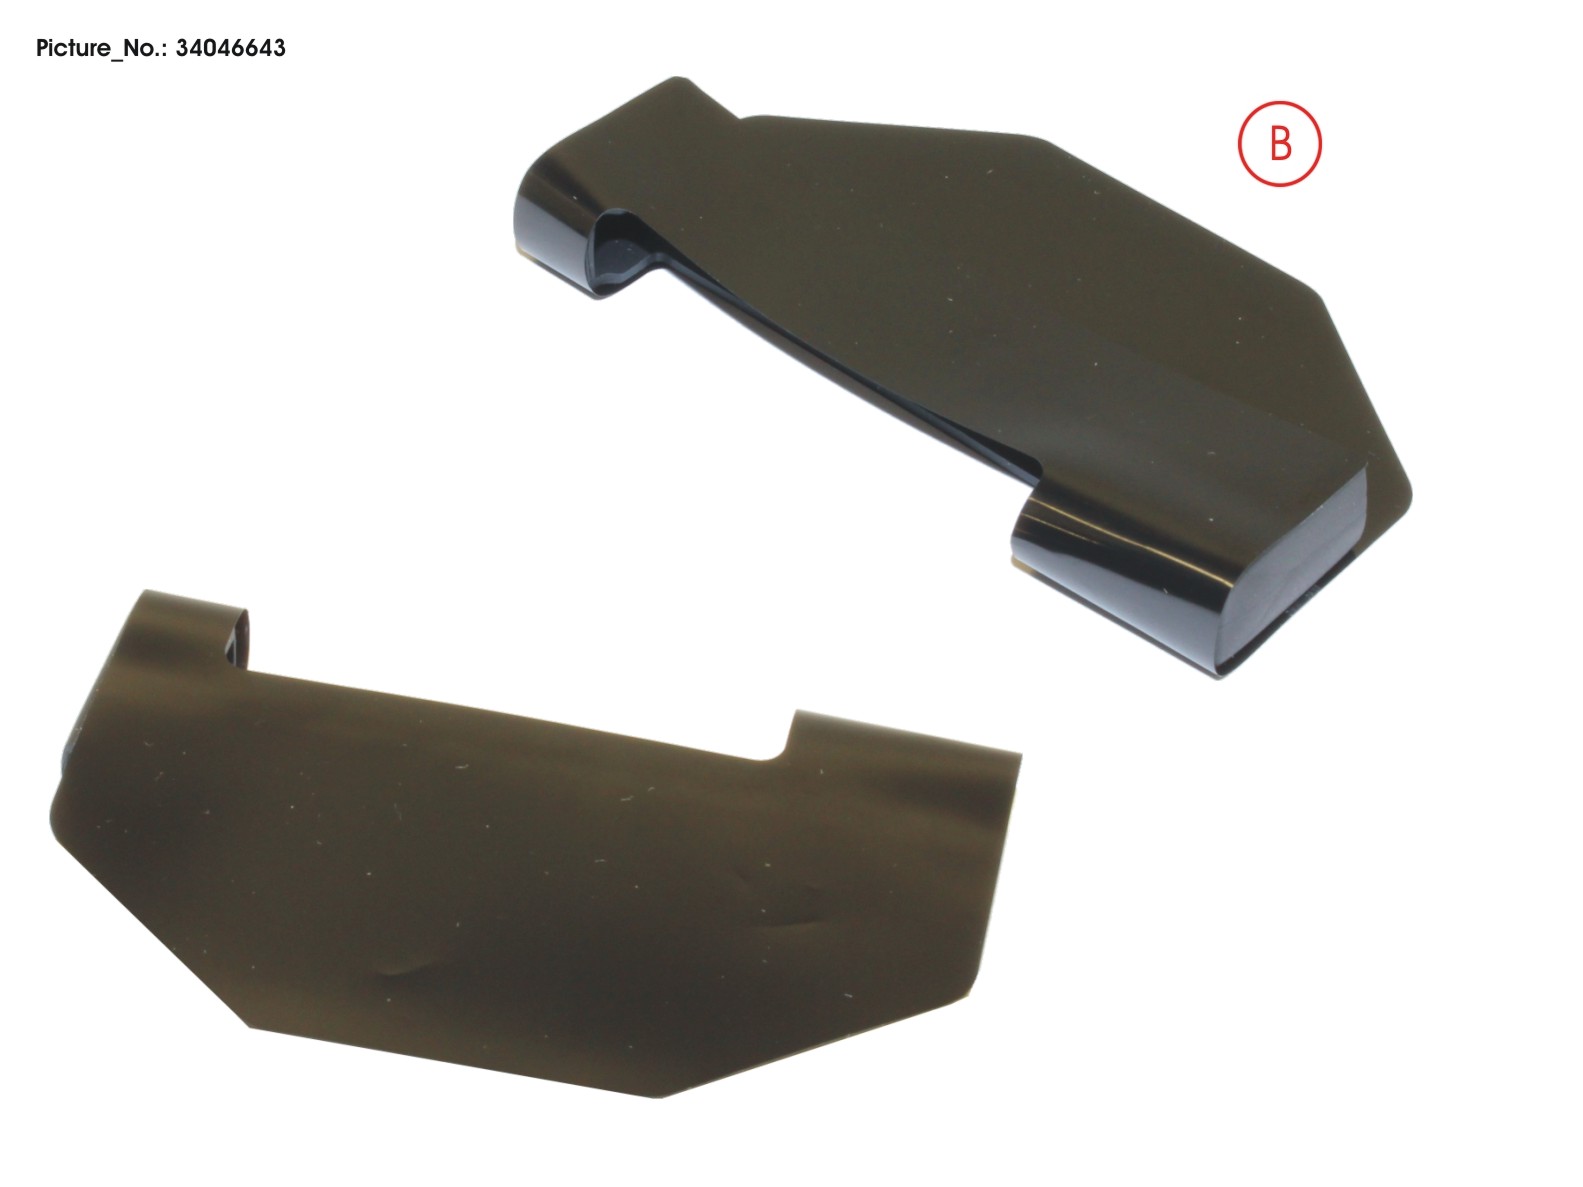 HDD RUBBER